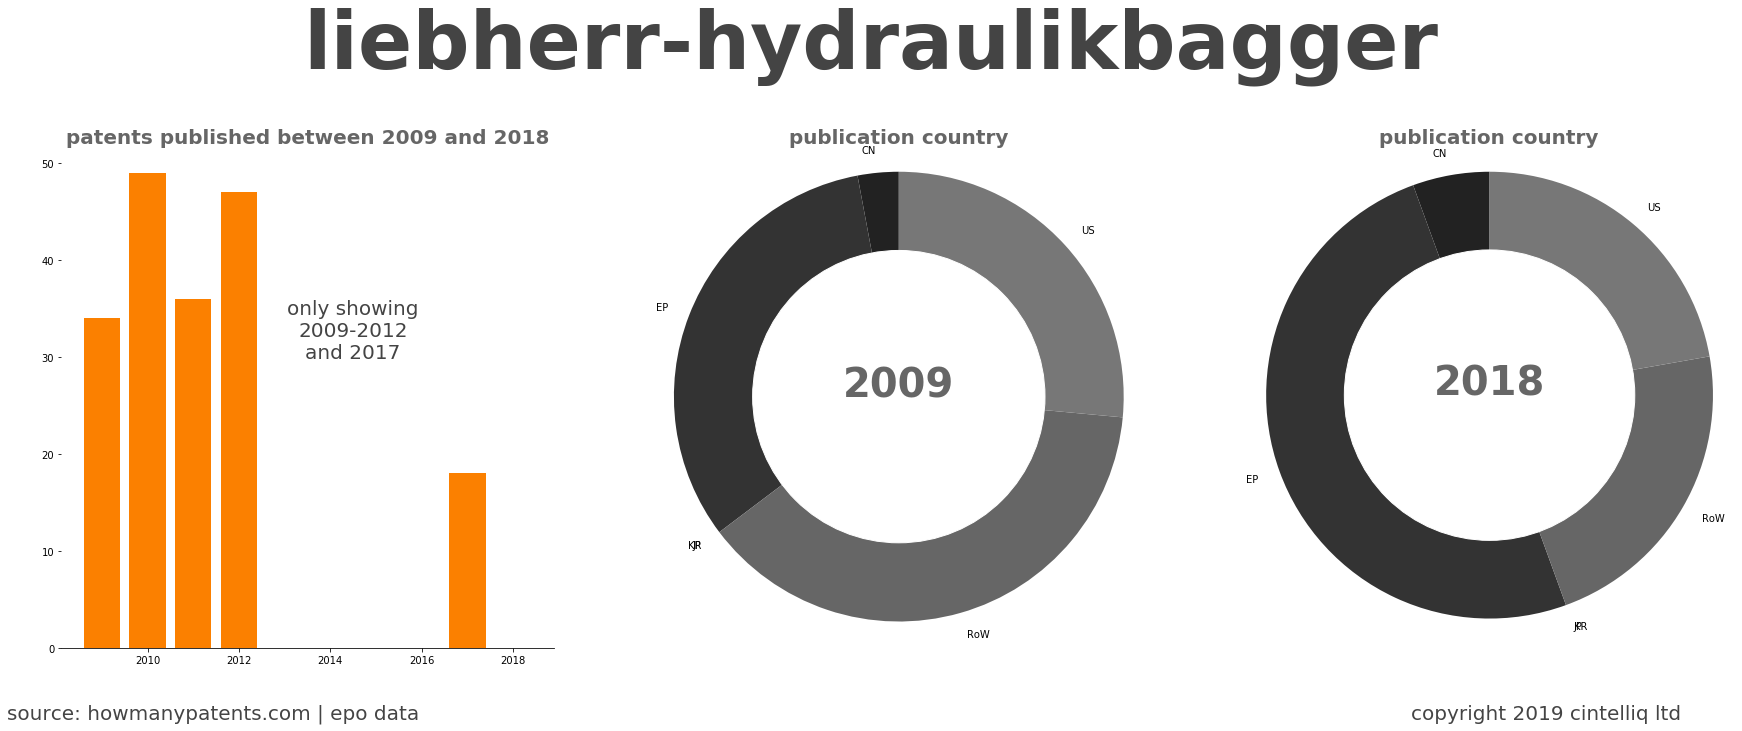 summary of patents for Liebherr-Hydraulikbagger